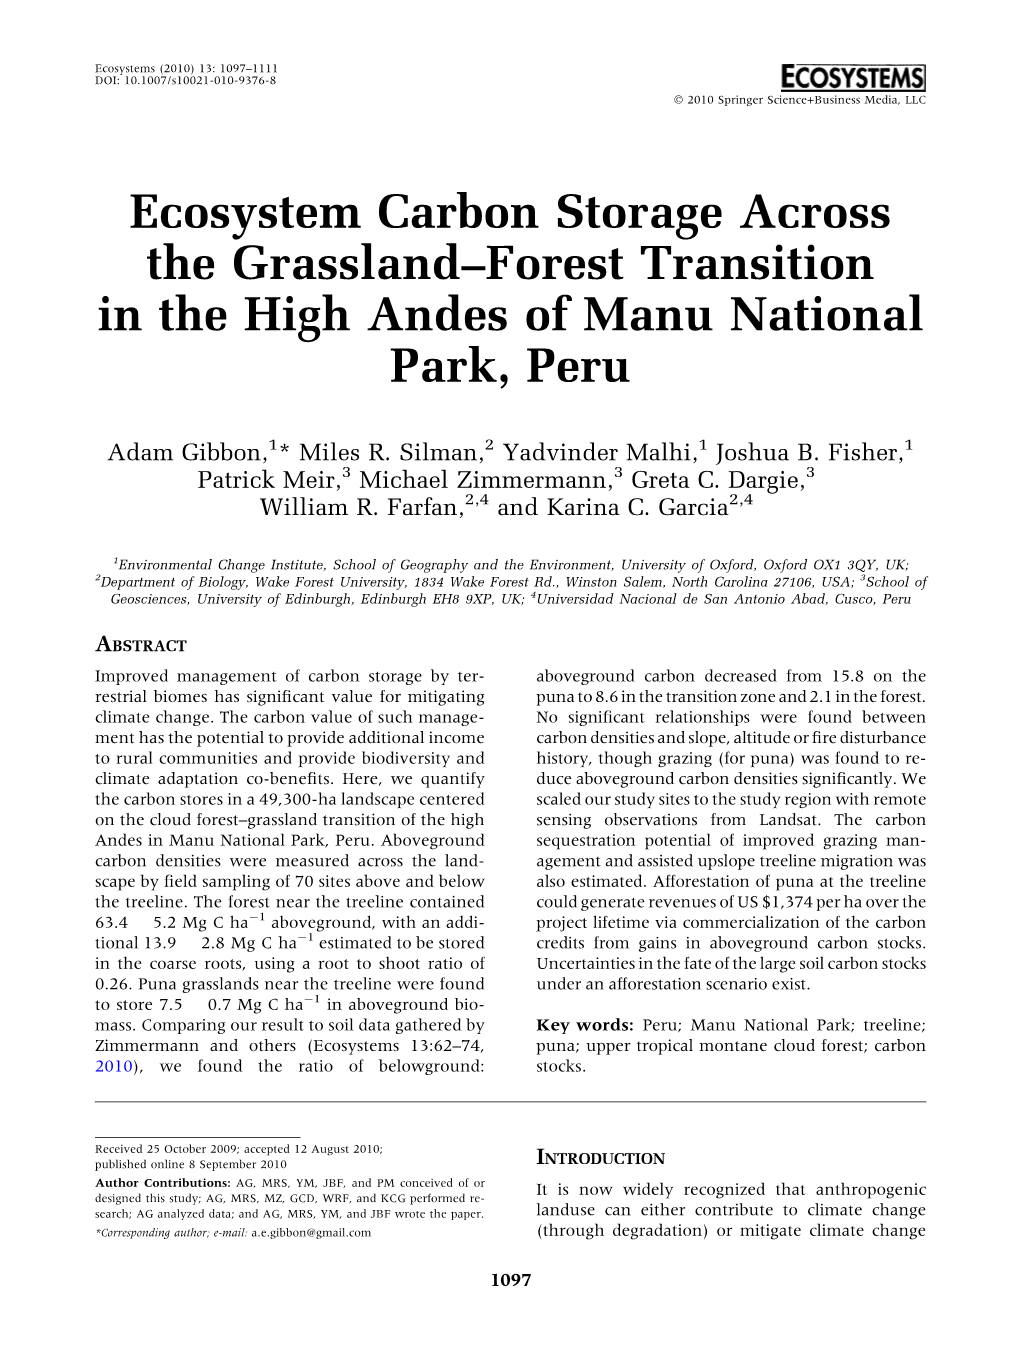 Ecosystem Carbon Storage Across the Grassland–Forest Transition in the High Andes of Manu National Park, Peru